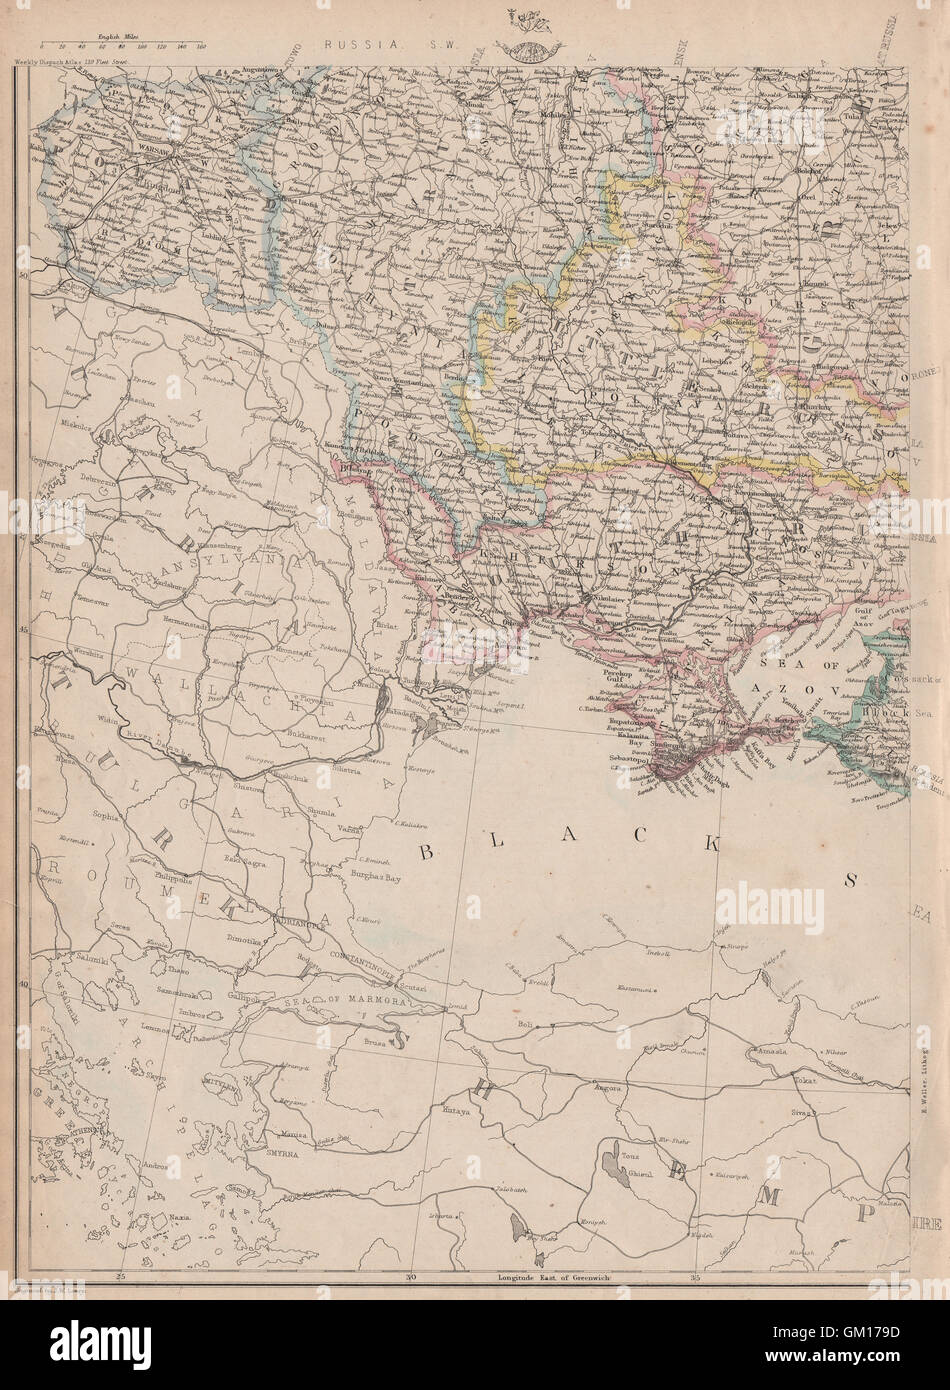 RUSSIA IN EUROPE SW. Ukraine & Poland. JW LOWRY for the Dispatch atlas, 1863 map Stock Photo